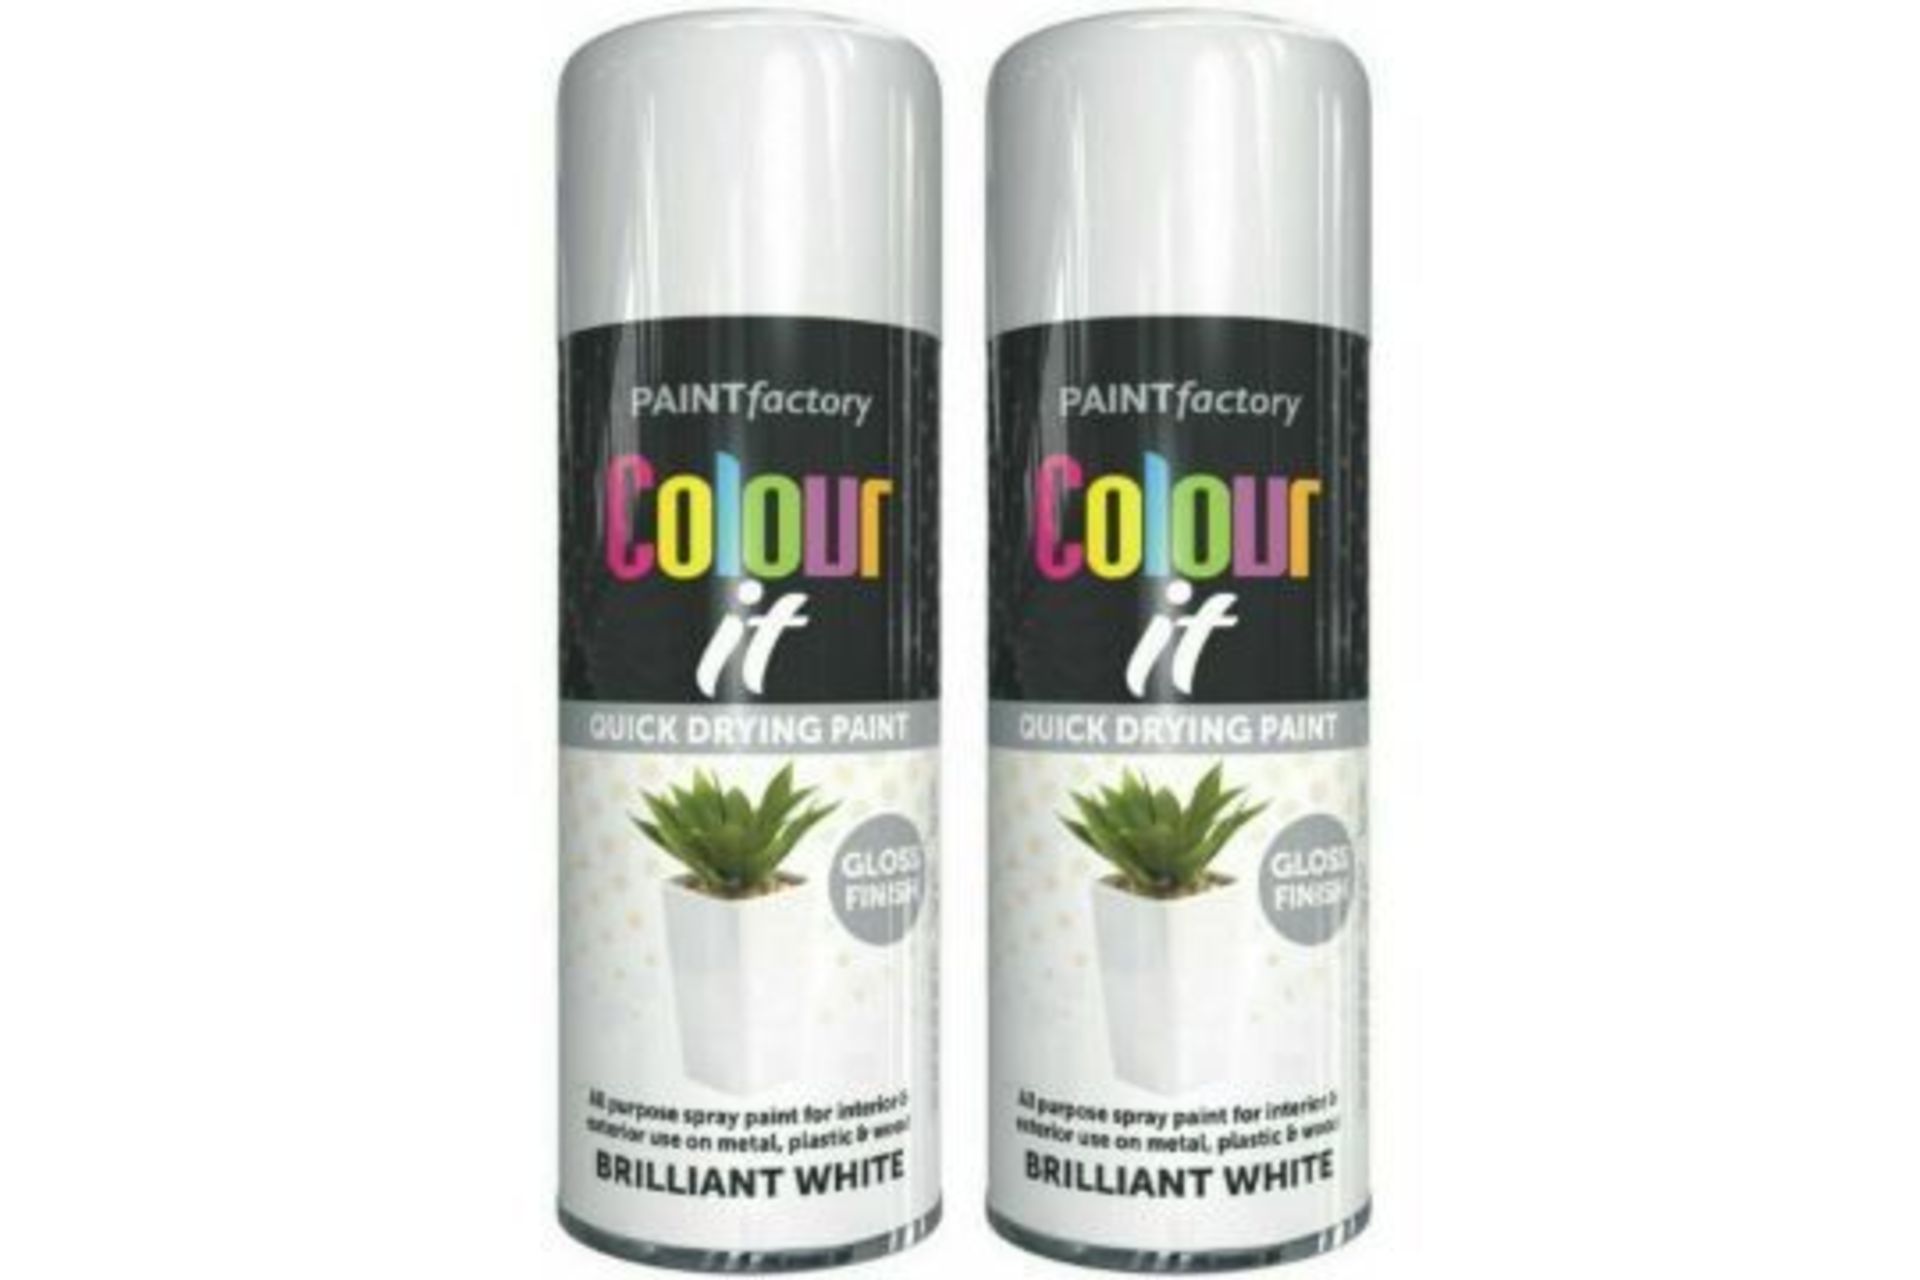 X2 BRAND NEW 400ML CANS OF COLOUR IT WHITE GLOSS FINISH SPRAY PAINT